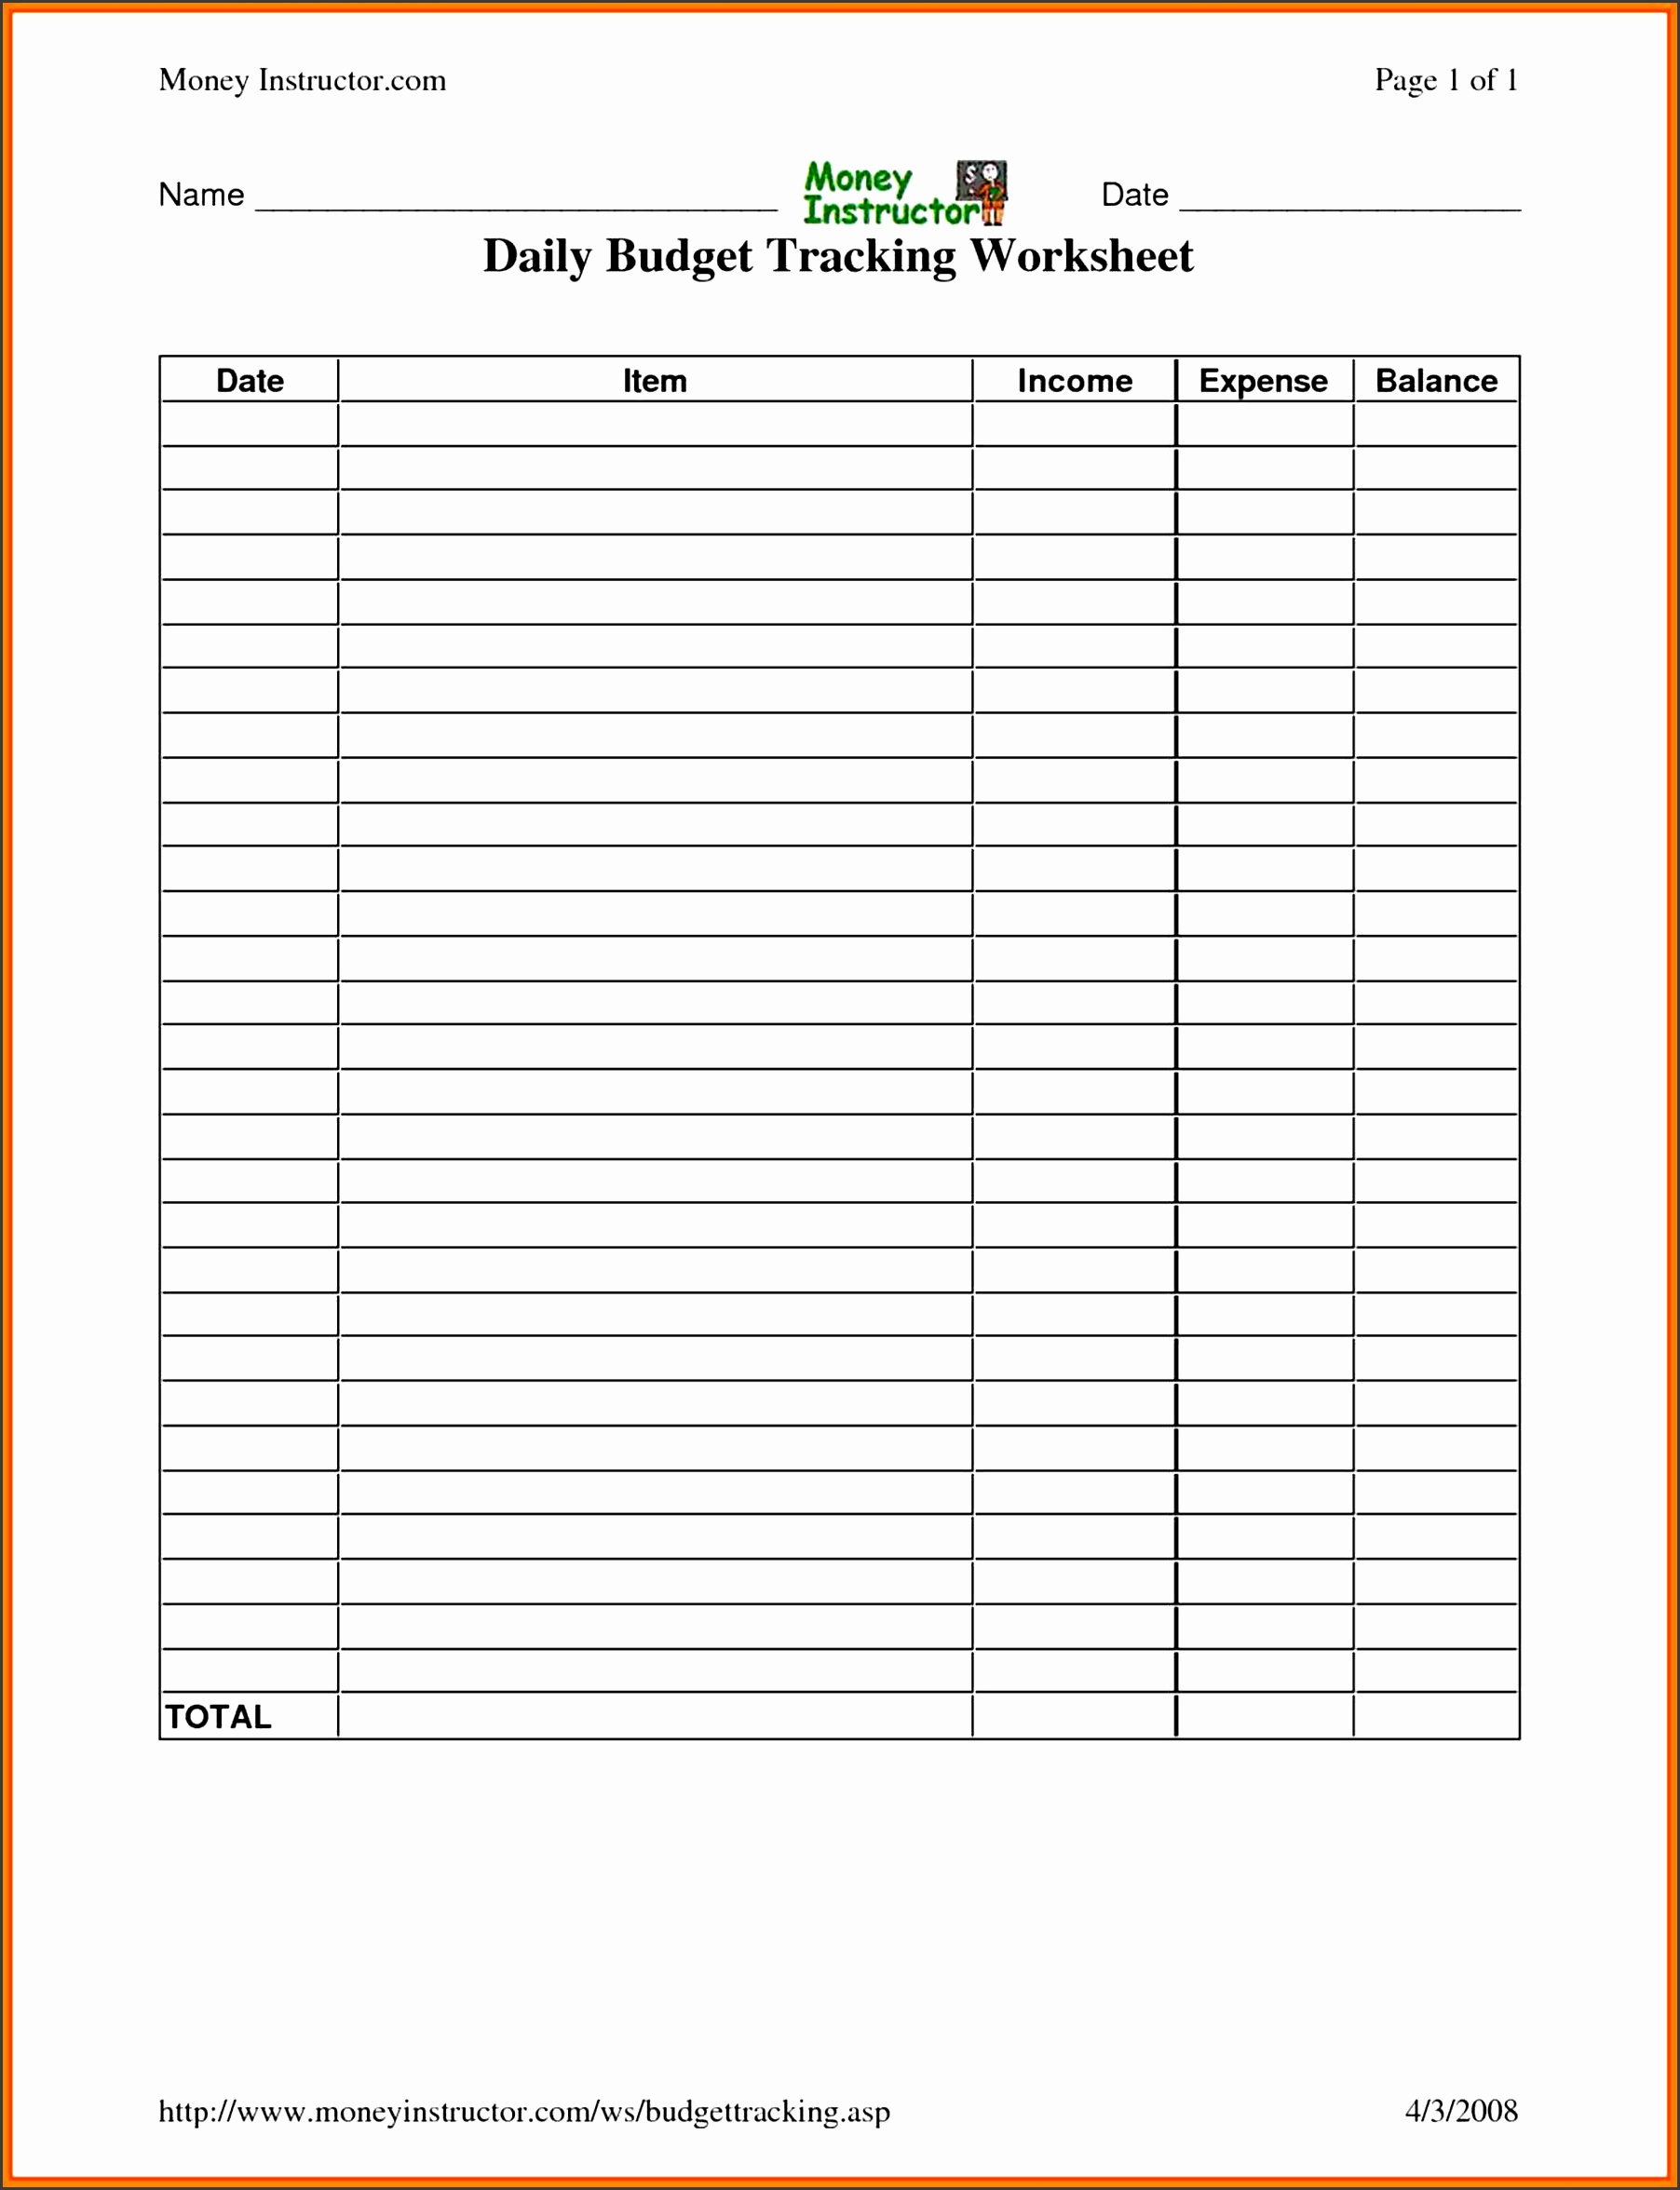 Daily Activity Report Template